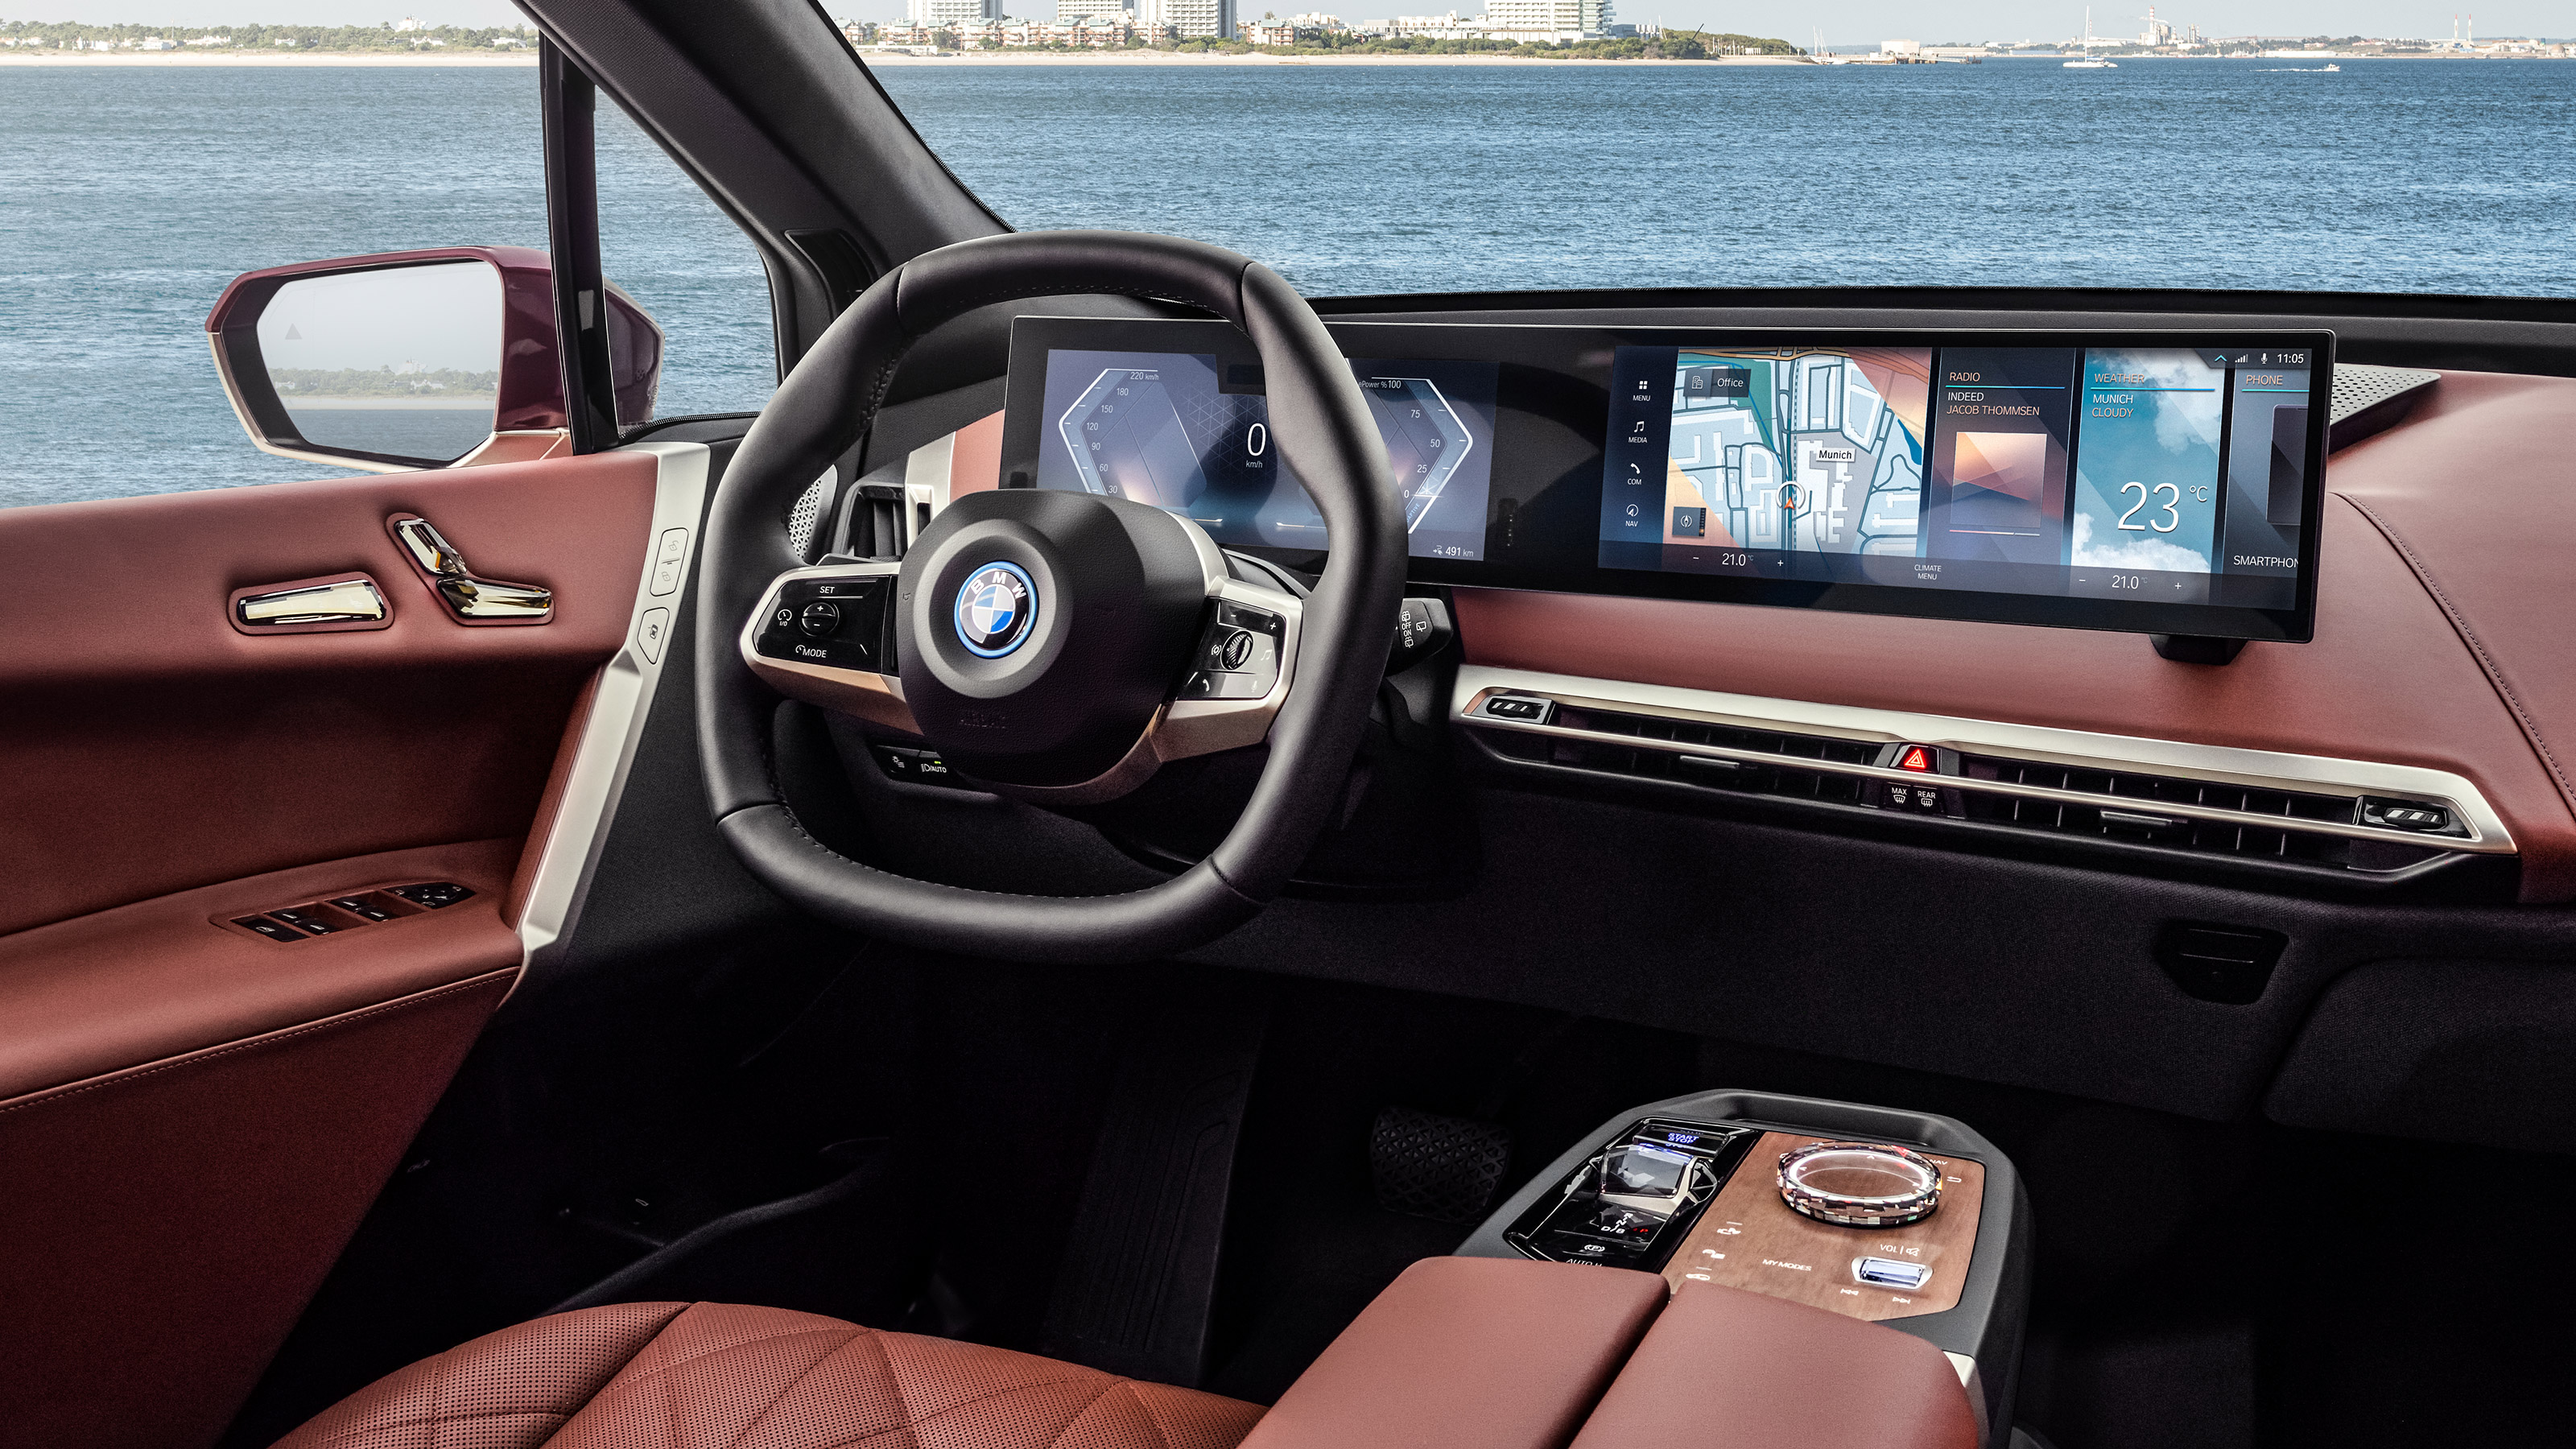 New BMW iDrive 8 infotainment system revealed in full Automotive Daily